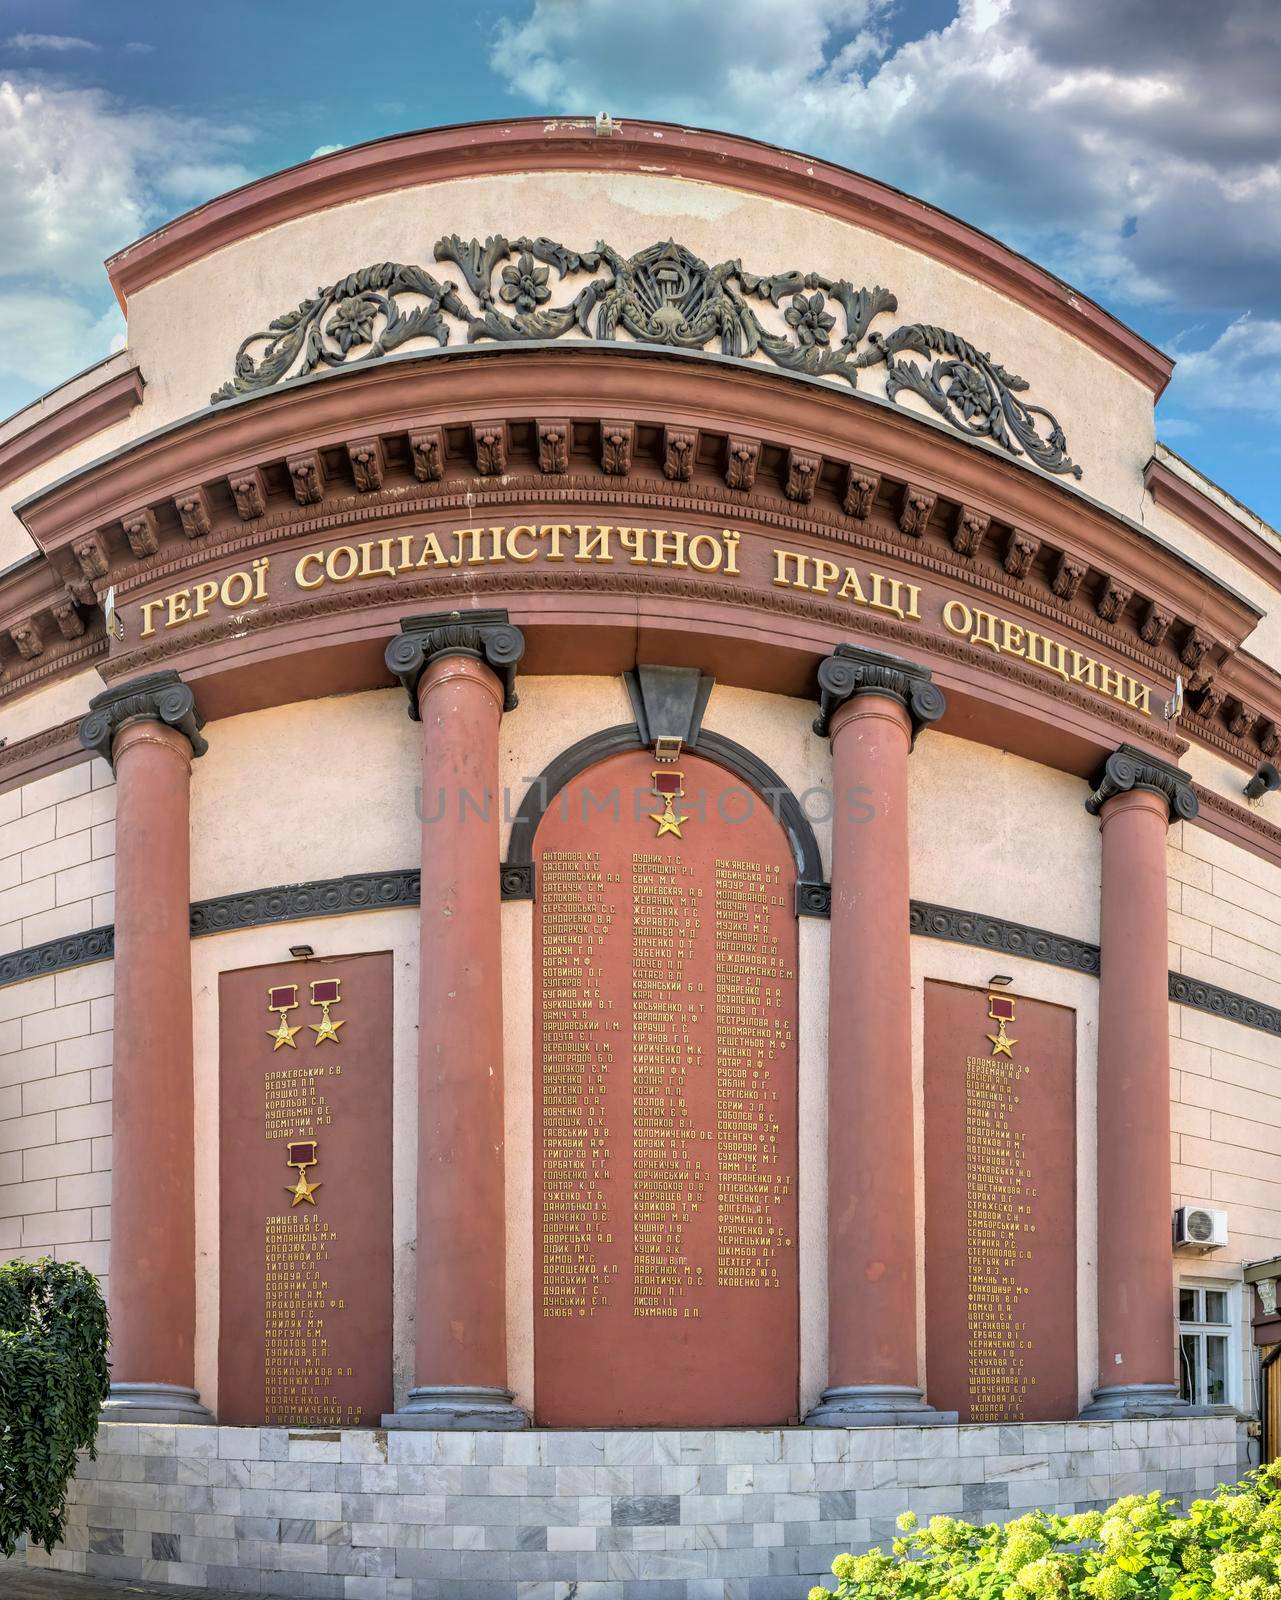 Memorial wall to the Heroes of the Soviet Union in Odessa, Ukraine by Multipedia